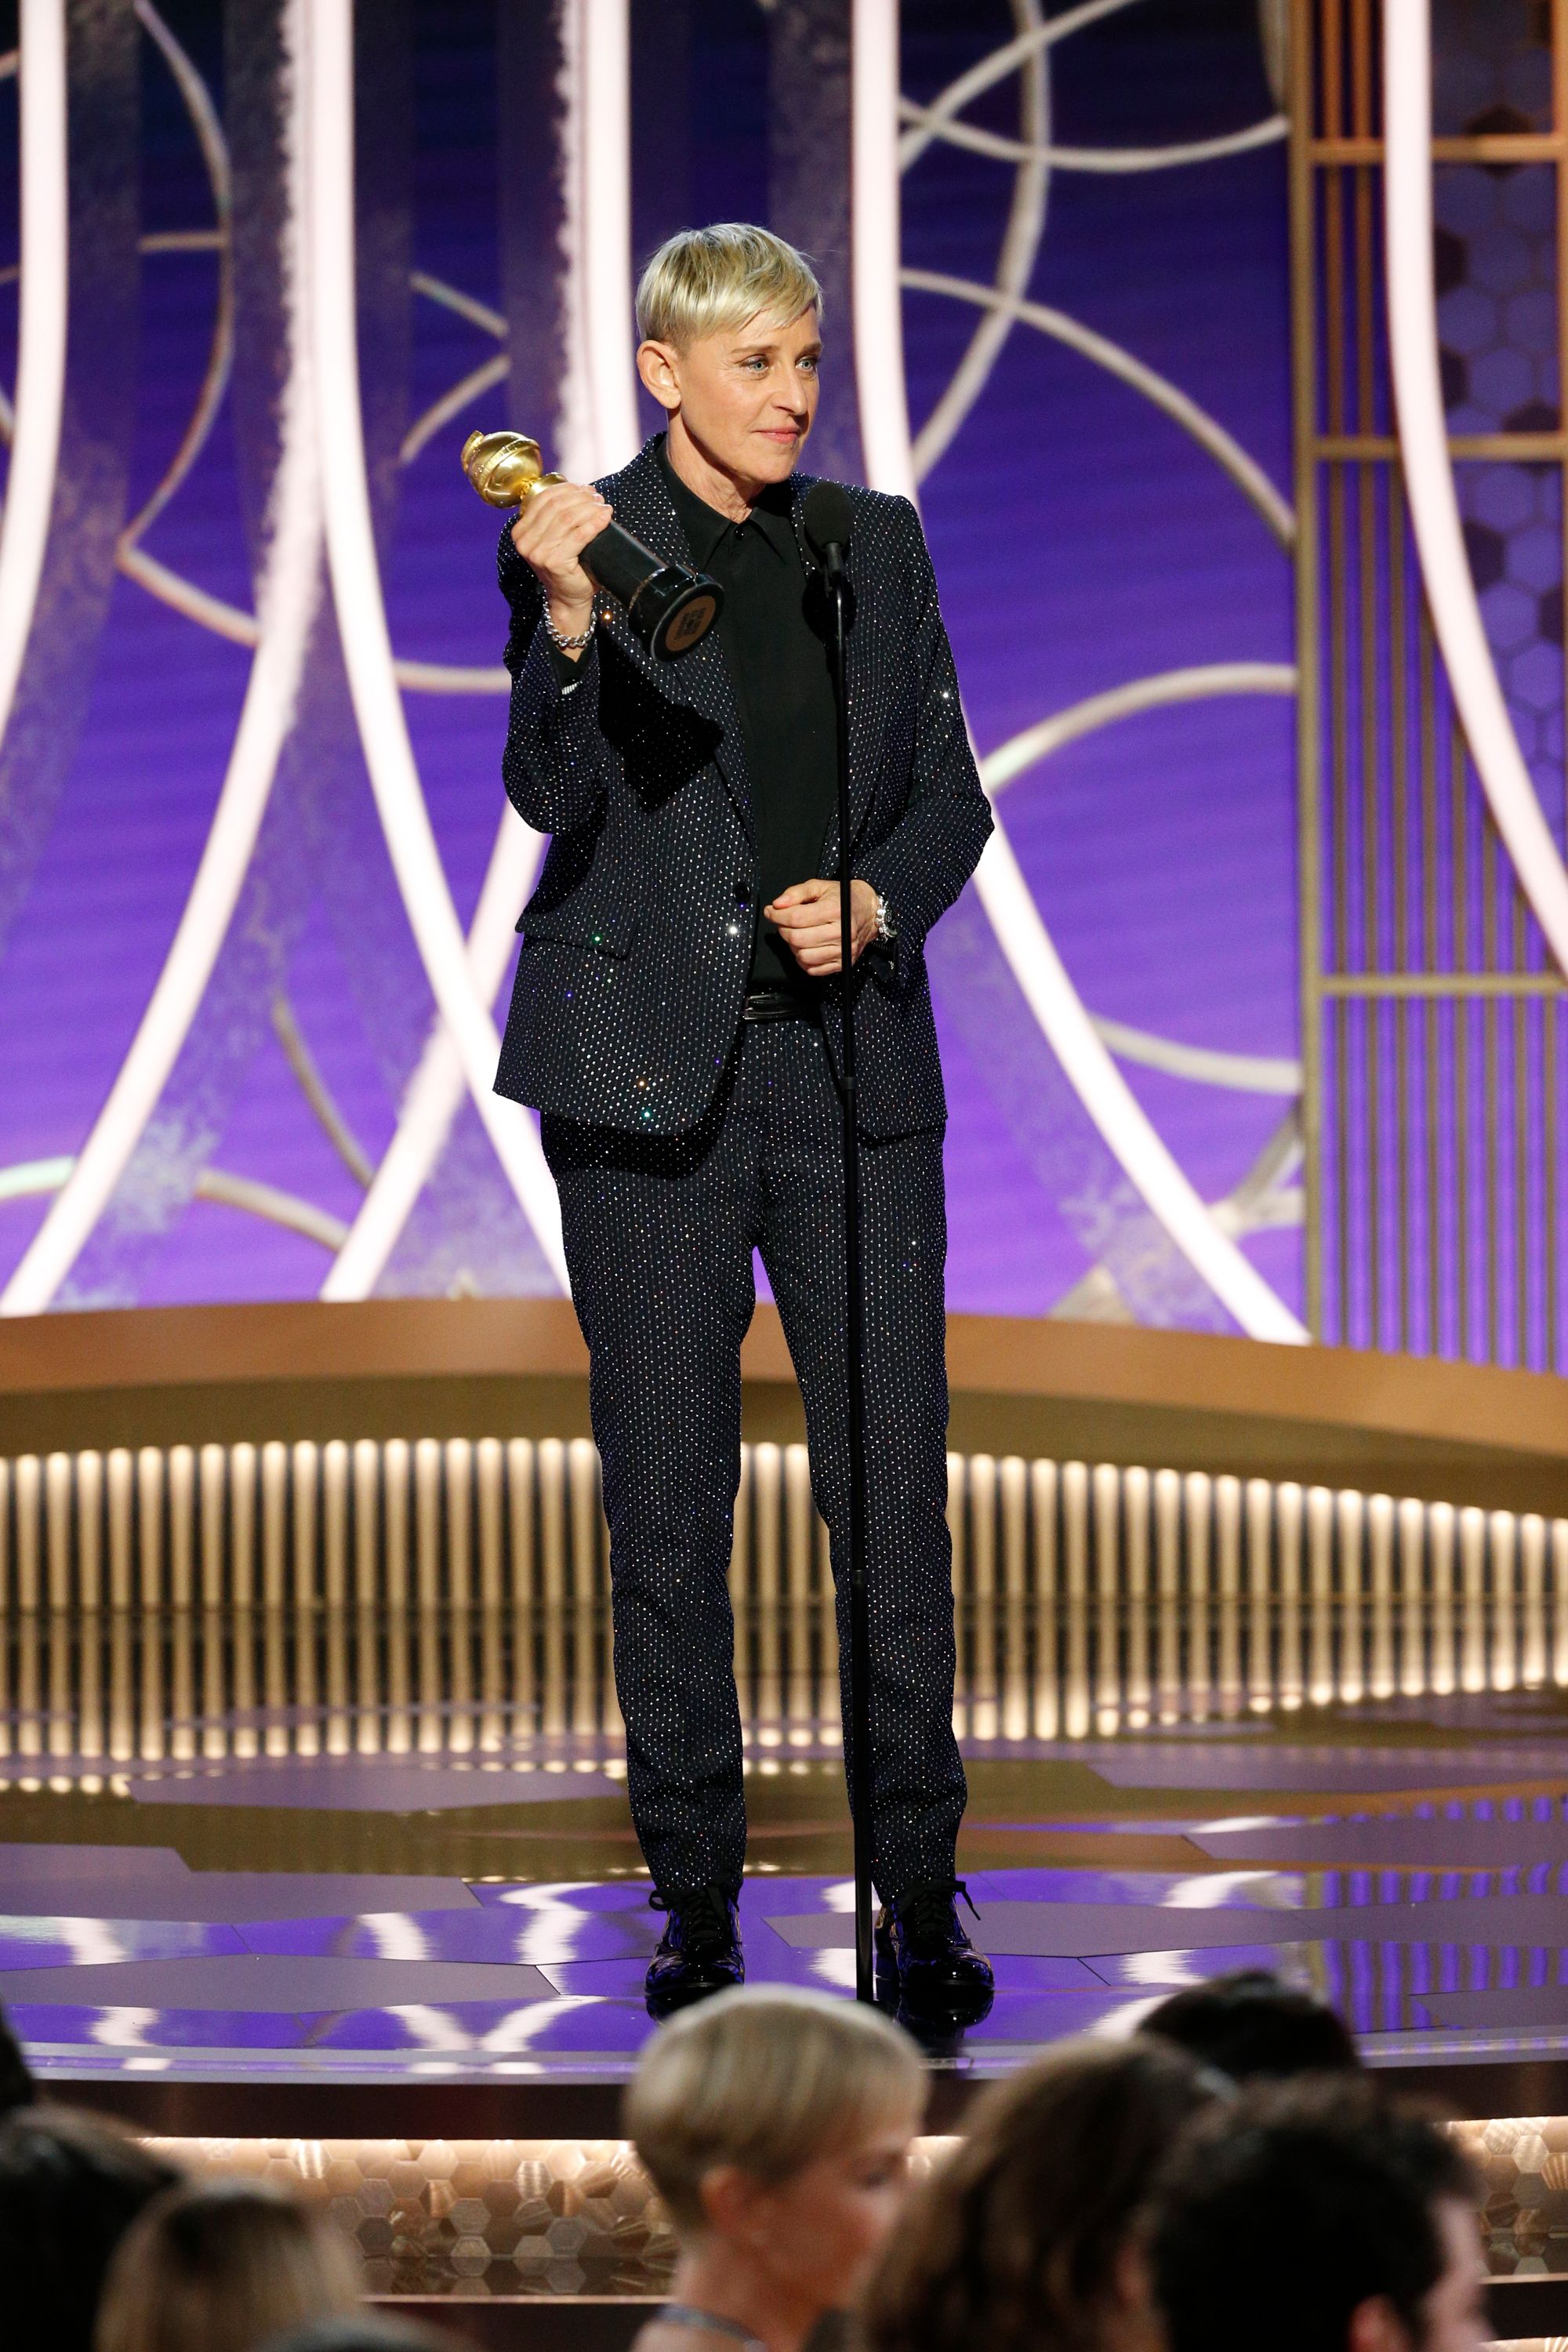 Ellen DeGeneres accepts the CAROL BURNETT AWARD onstage during the 77th Annual Golden Globe Awards at The Beverly Hilton Hotel on January 5, 2020 in Beverly Hills, California. | Source: Getty Images